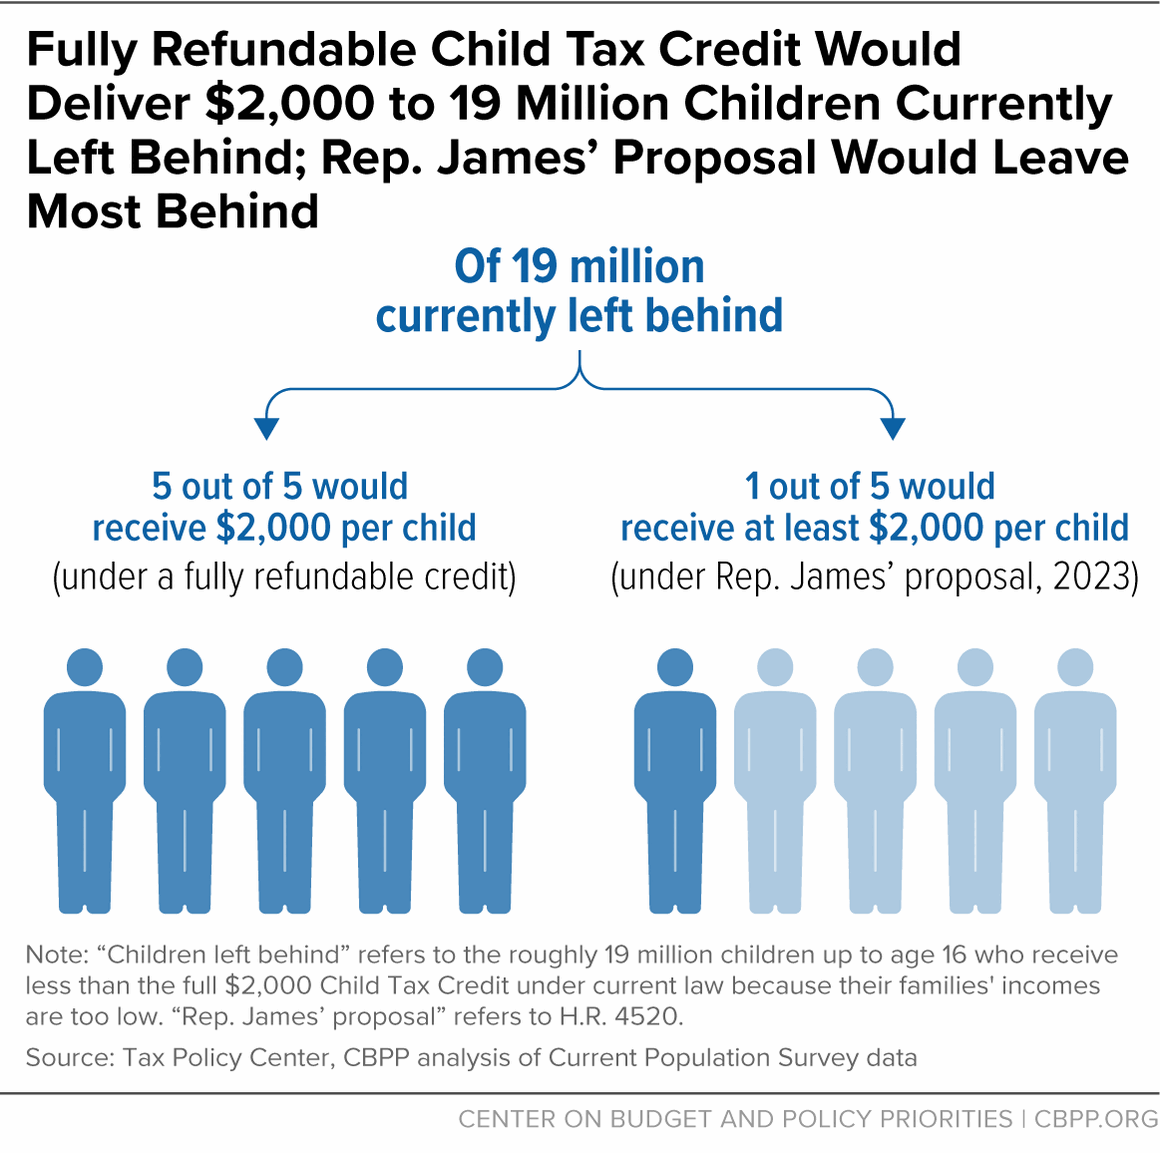 Fully Refundable Child Tax Credit Would Deliver $2,000 to 19 Million Children Currently Left Behind; Rep. James' Proposal Would Leave Most Behind